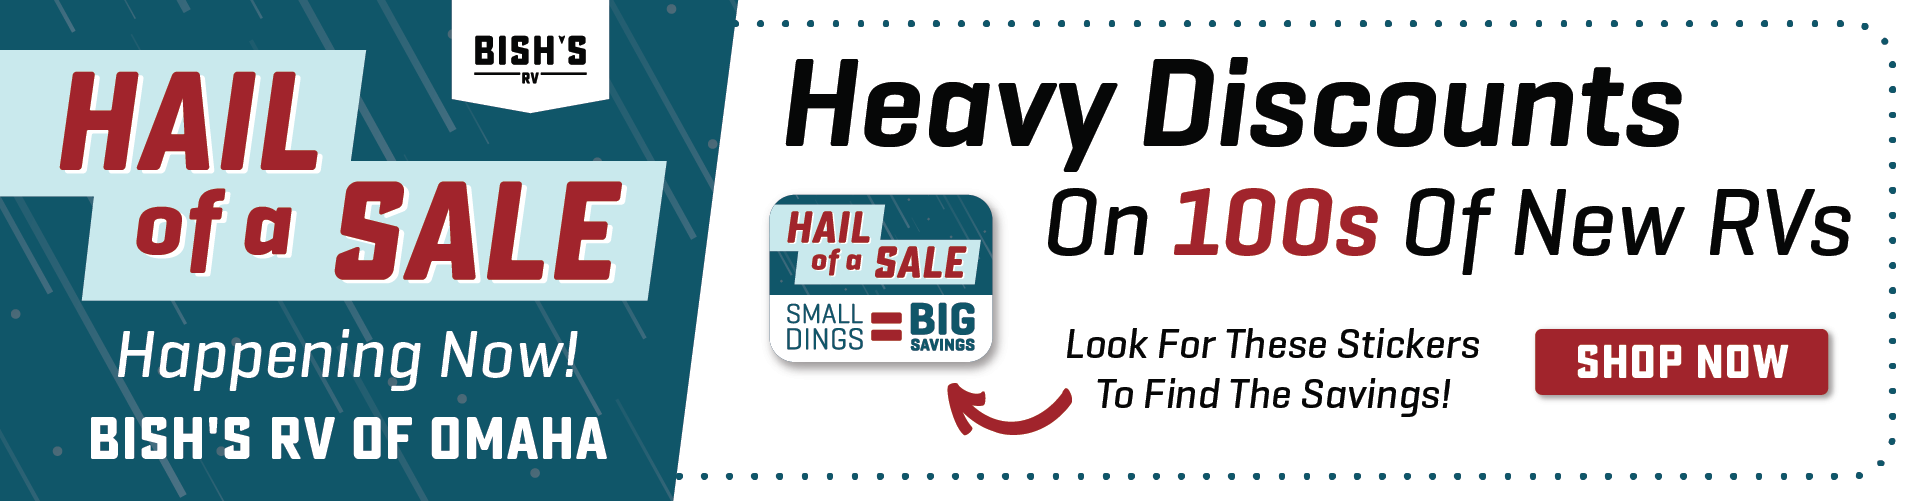 Small Dings = Big Savings - Get discounts on hail damaged RVs - Happening Now While Supplies Last - Bish's RV of Omaha